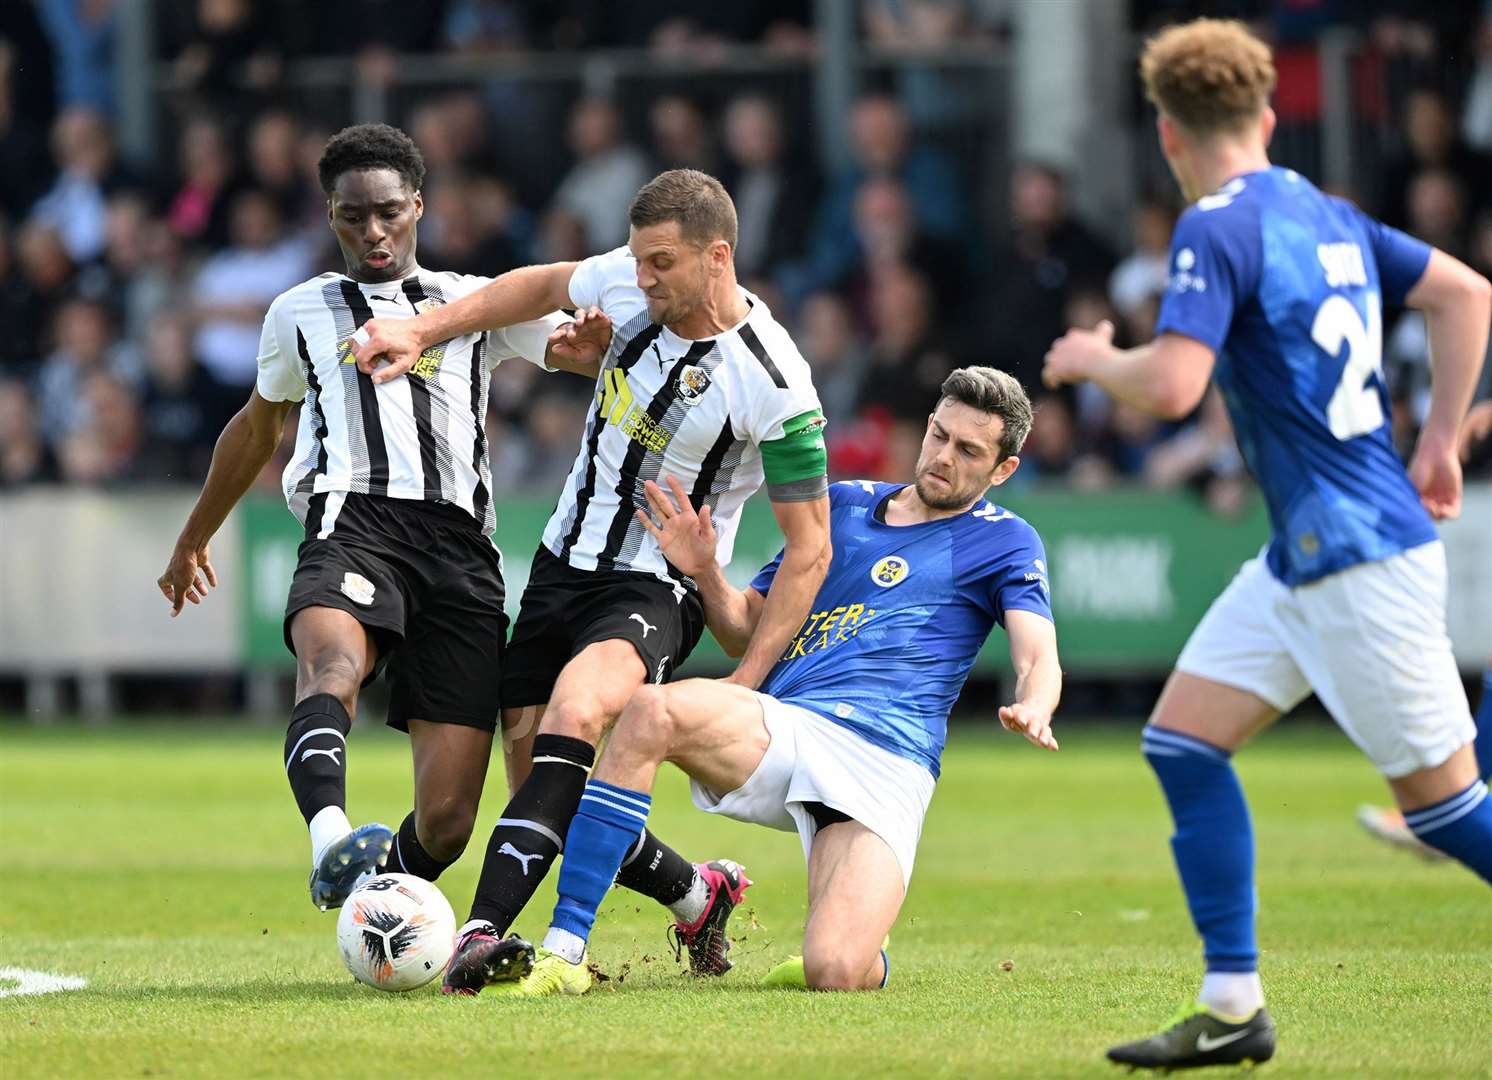 Tom Bonner in what proved to be his final match for Dartford - the National League South play-off semi-final with St Albans in May. Picture: Keith Gillard